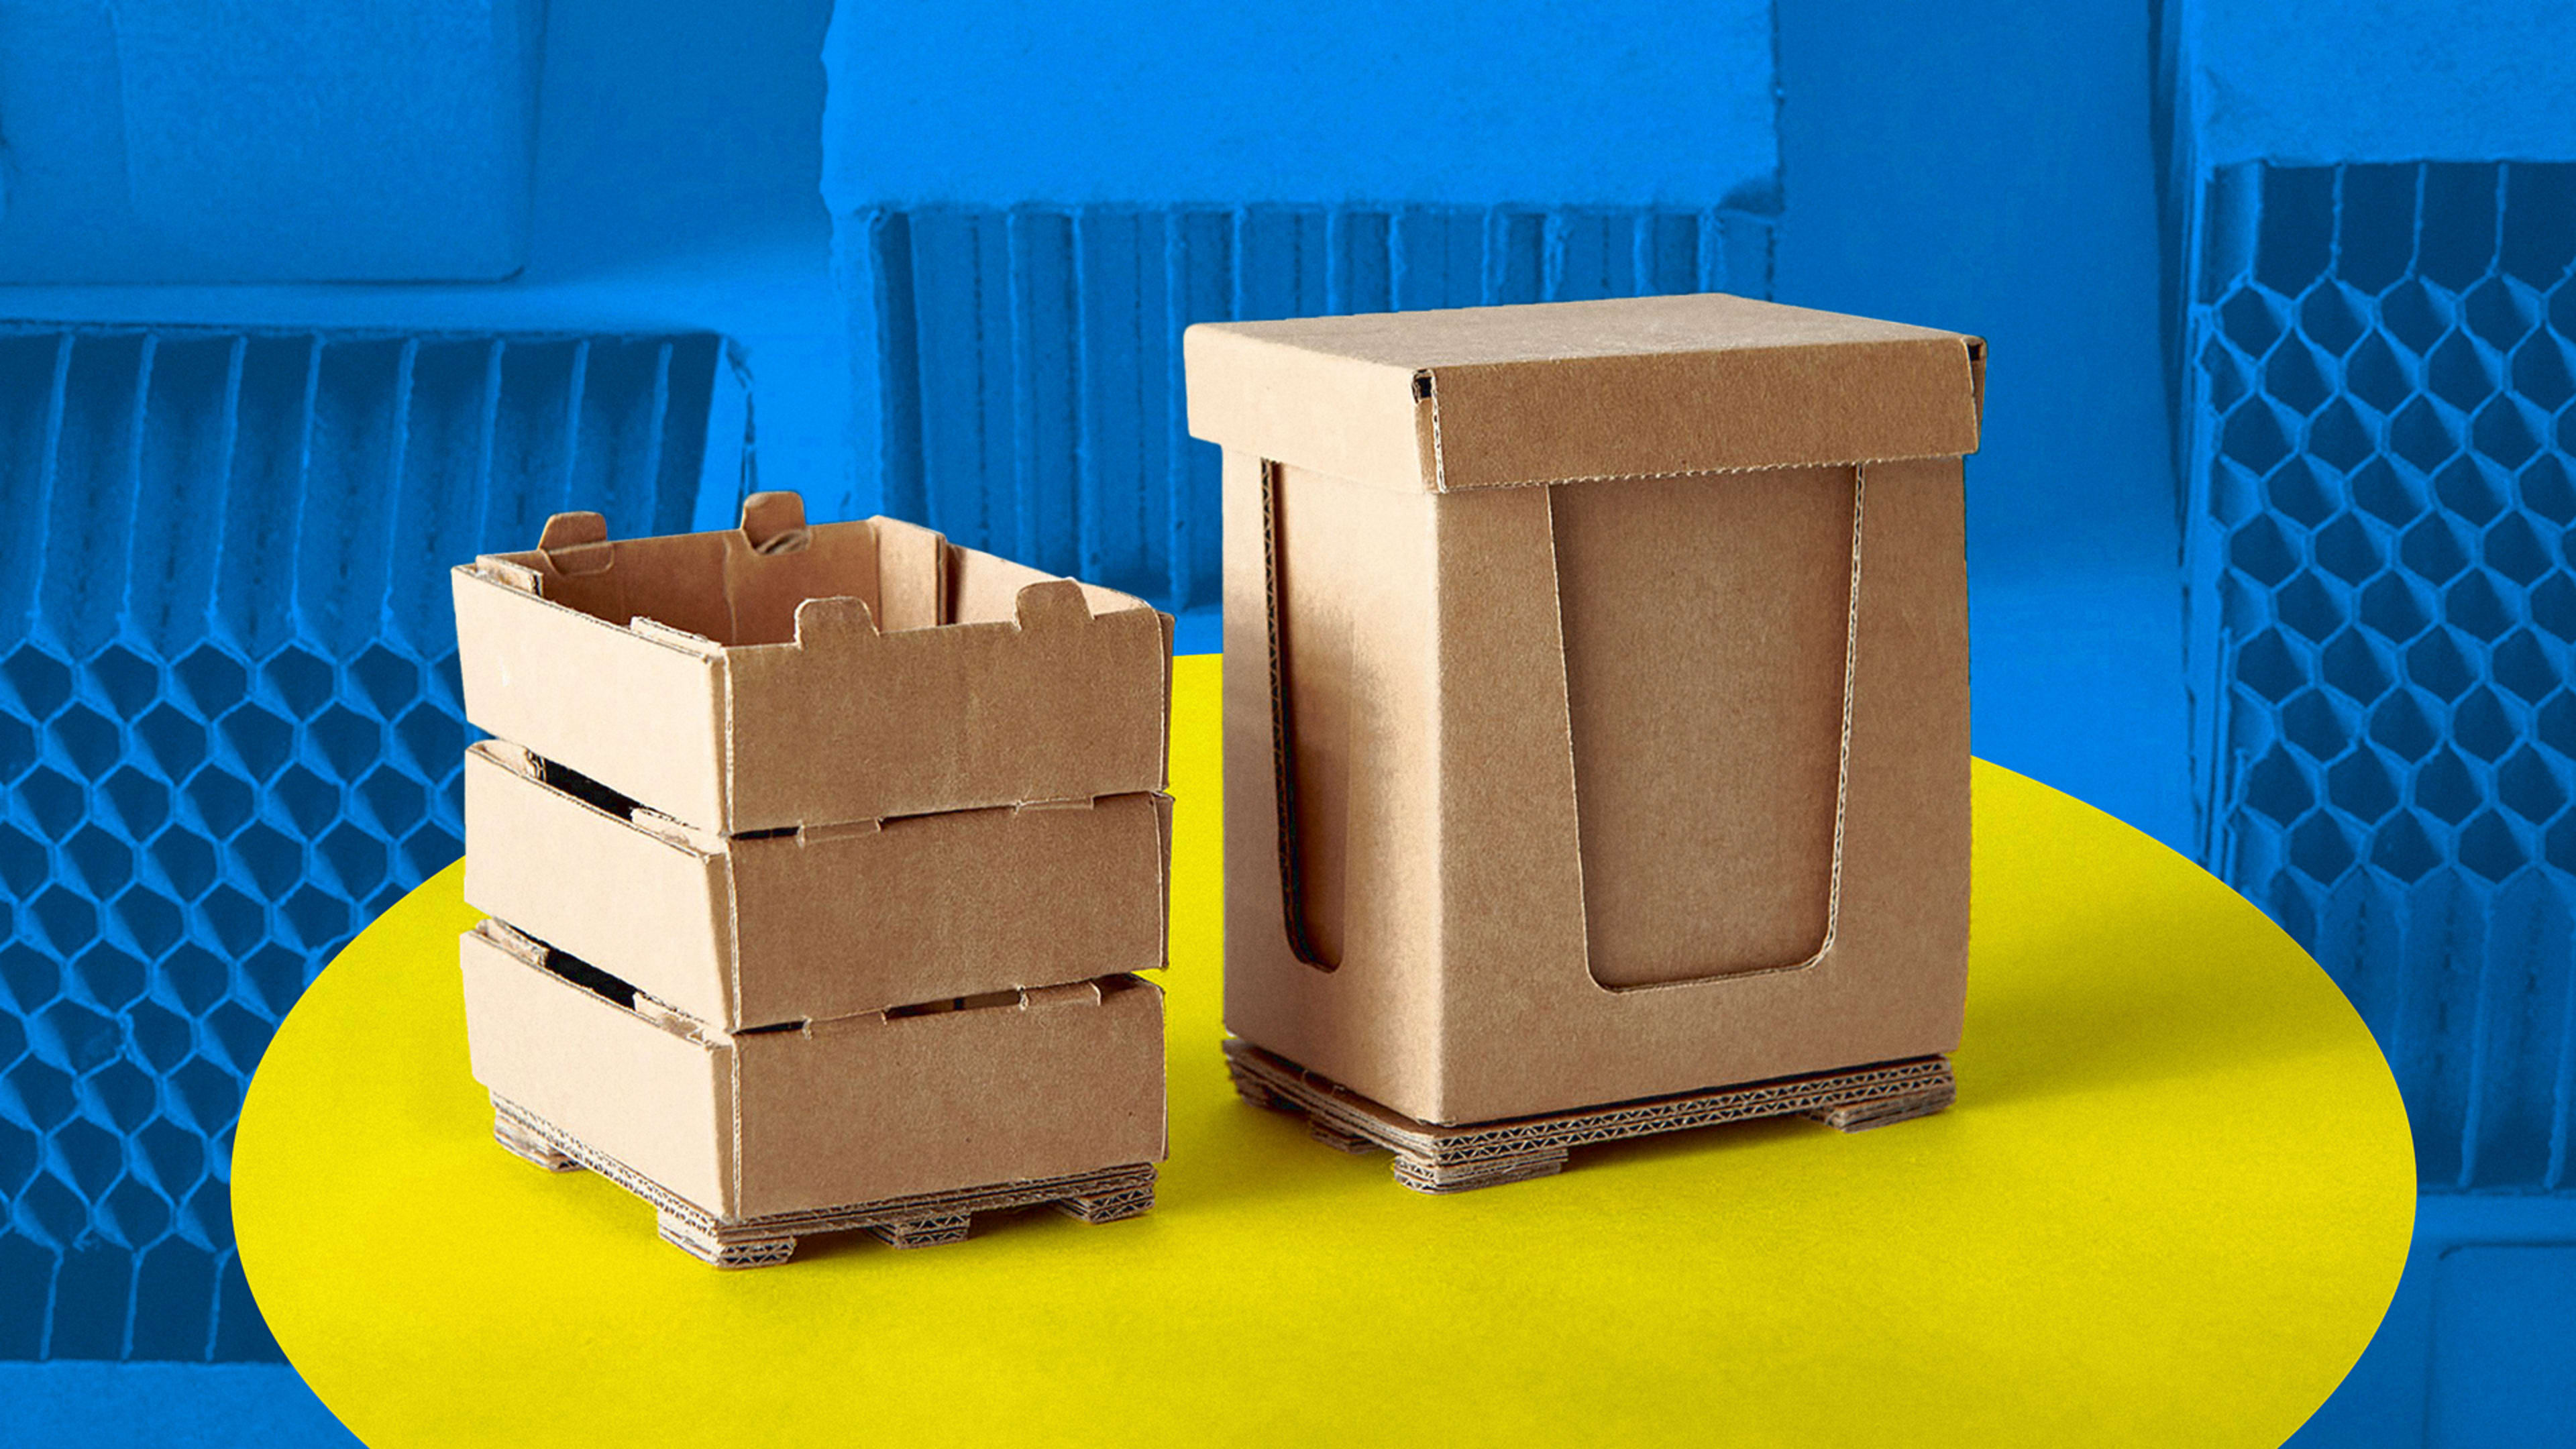 Ikea says it will eliminate plastic packaging by 2028